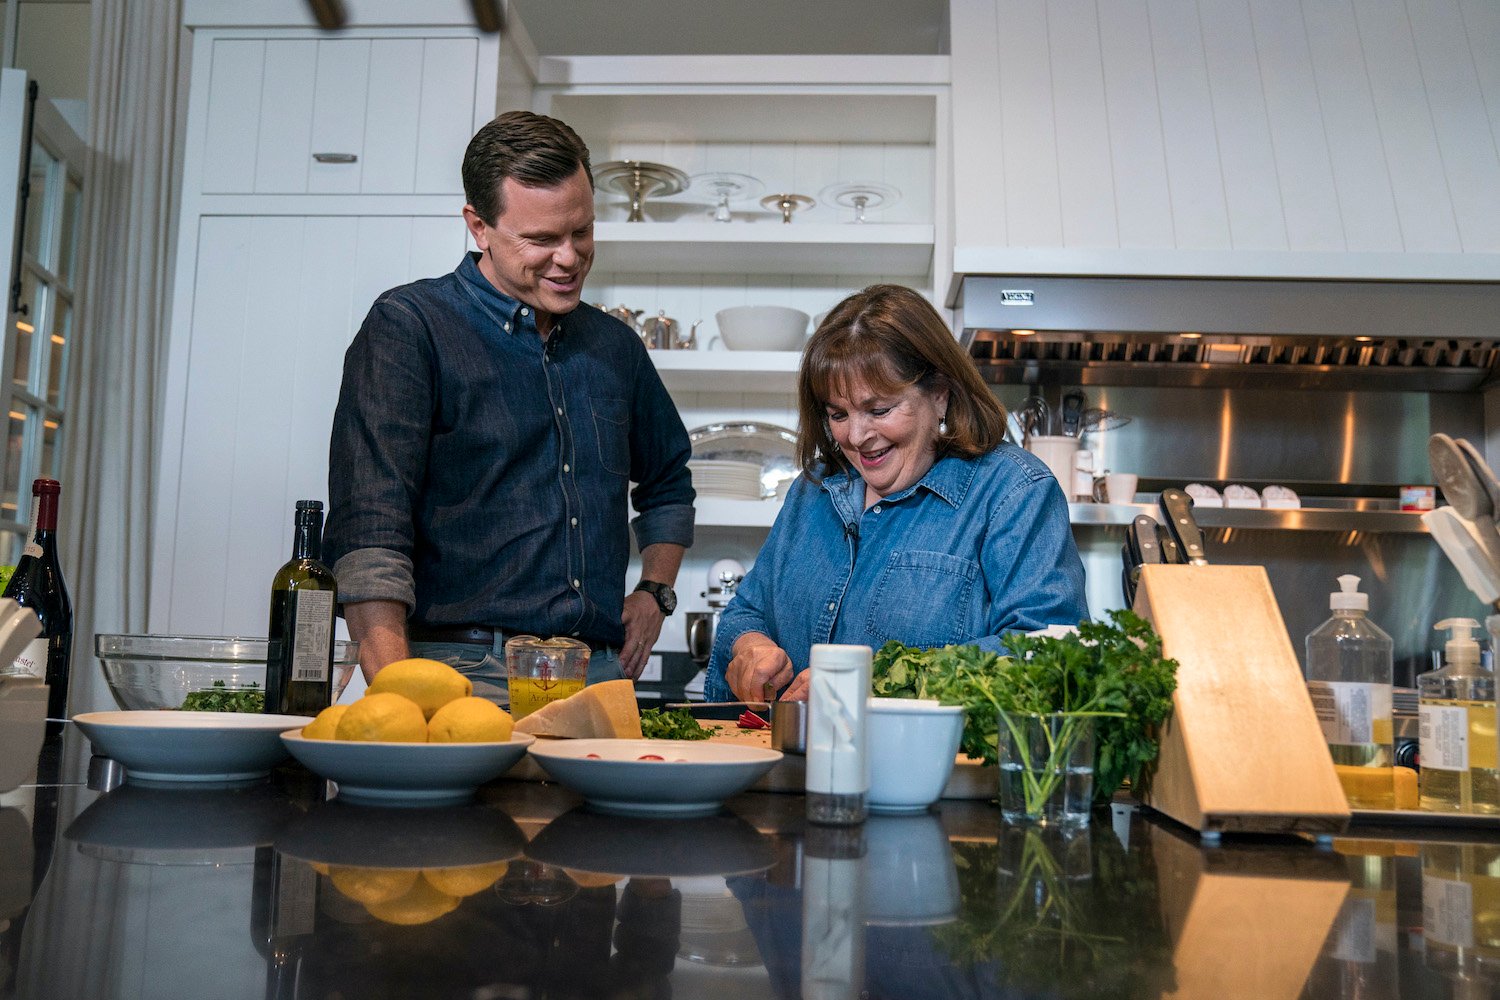 Ina Garten and Willie Geist and Ina Garten cook in the Barefoot Contessa star's kitchen during a Sunday Today segment